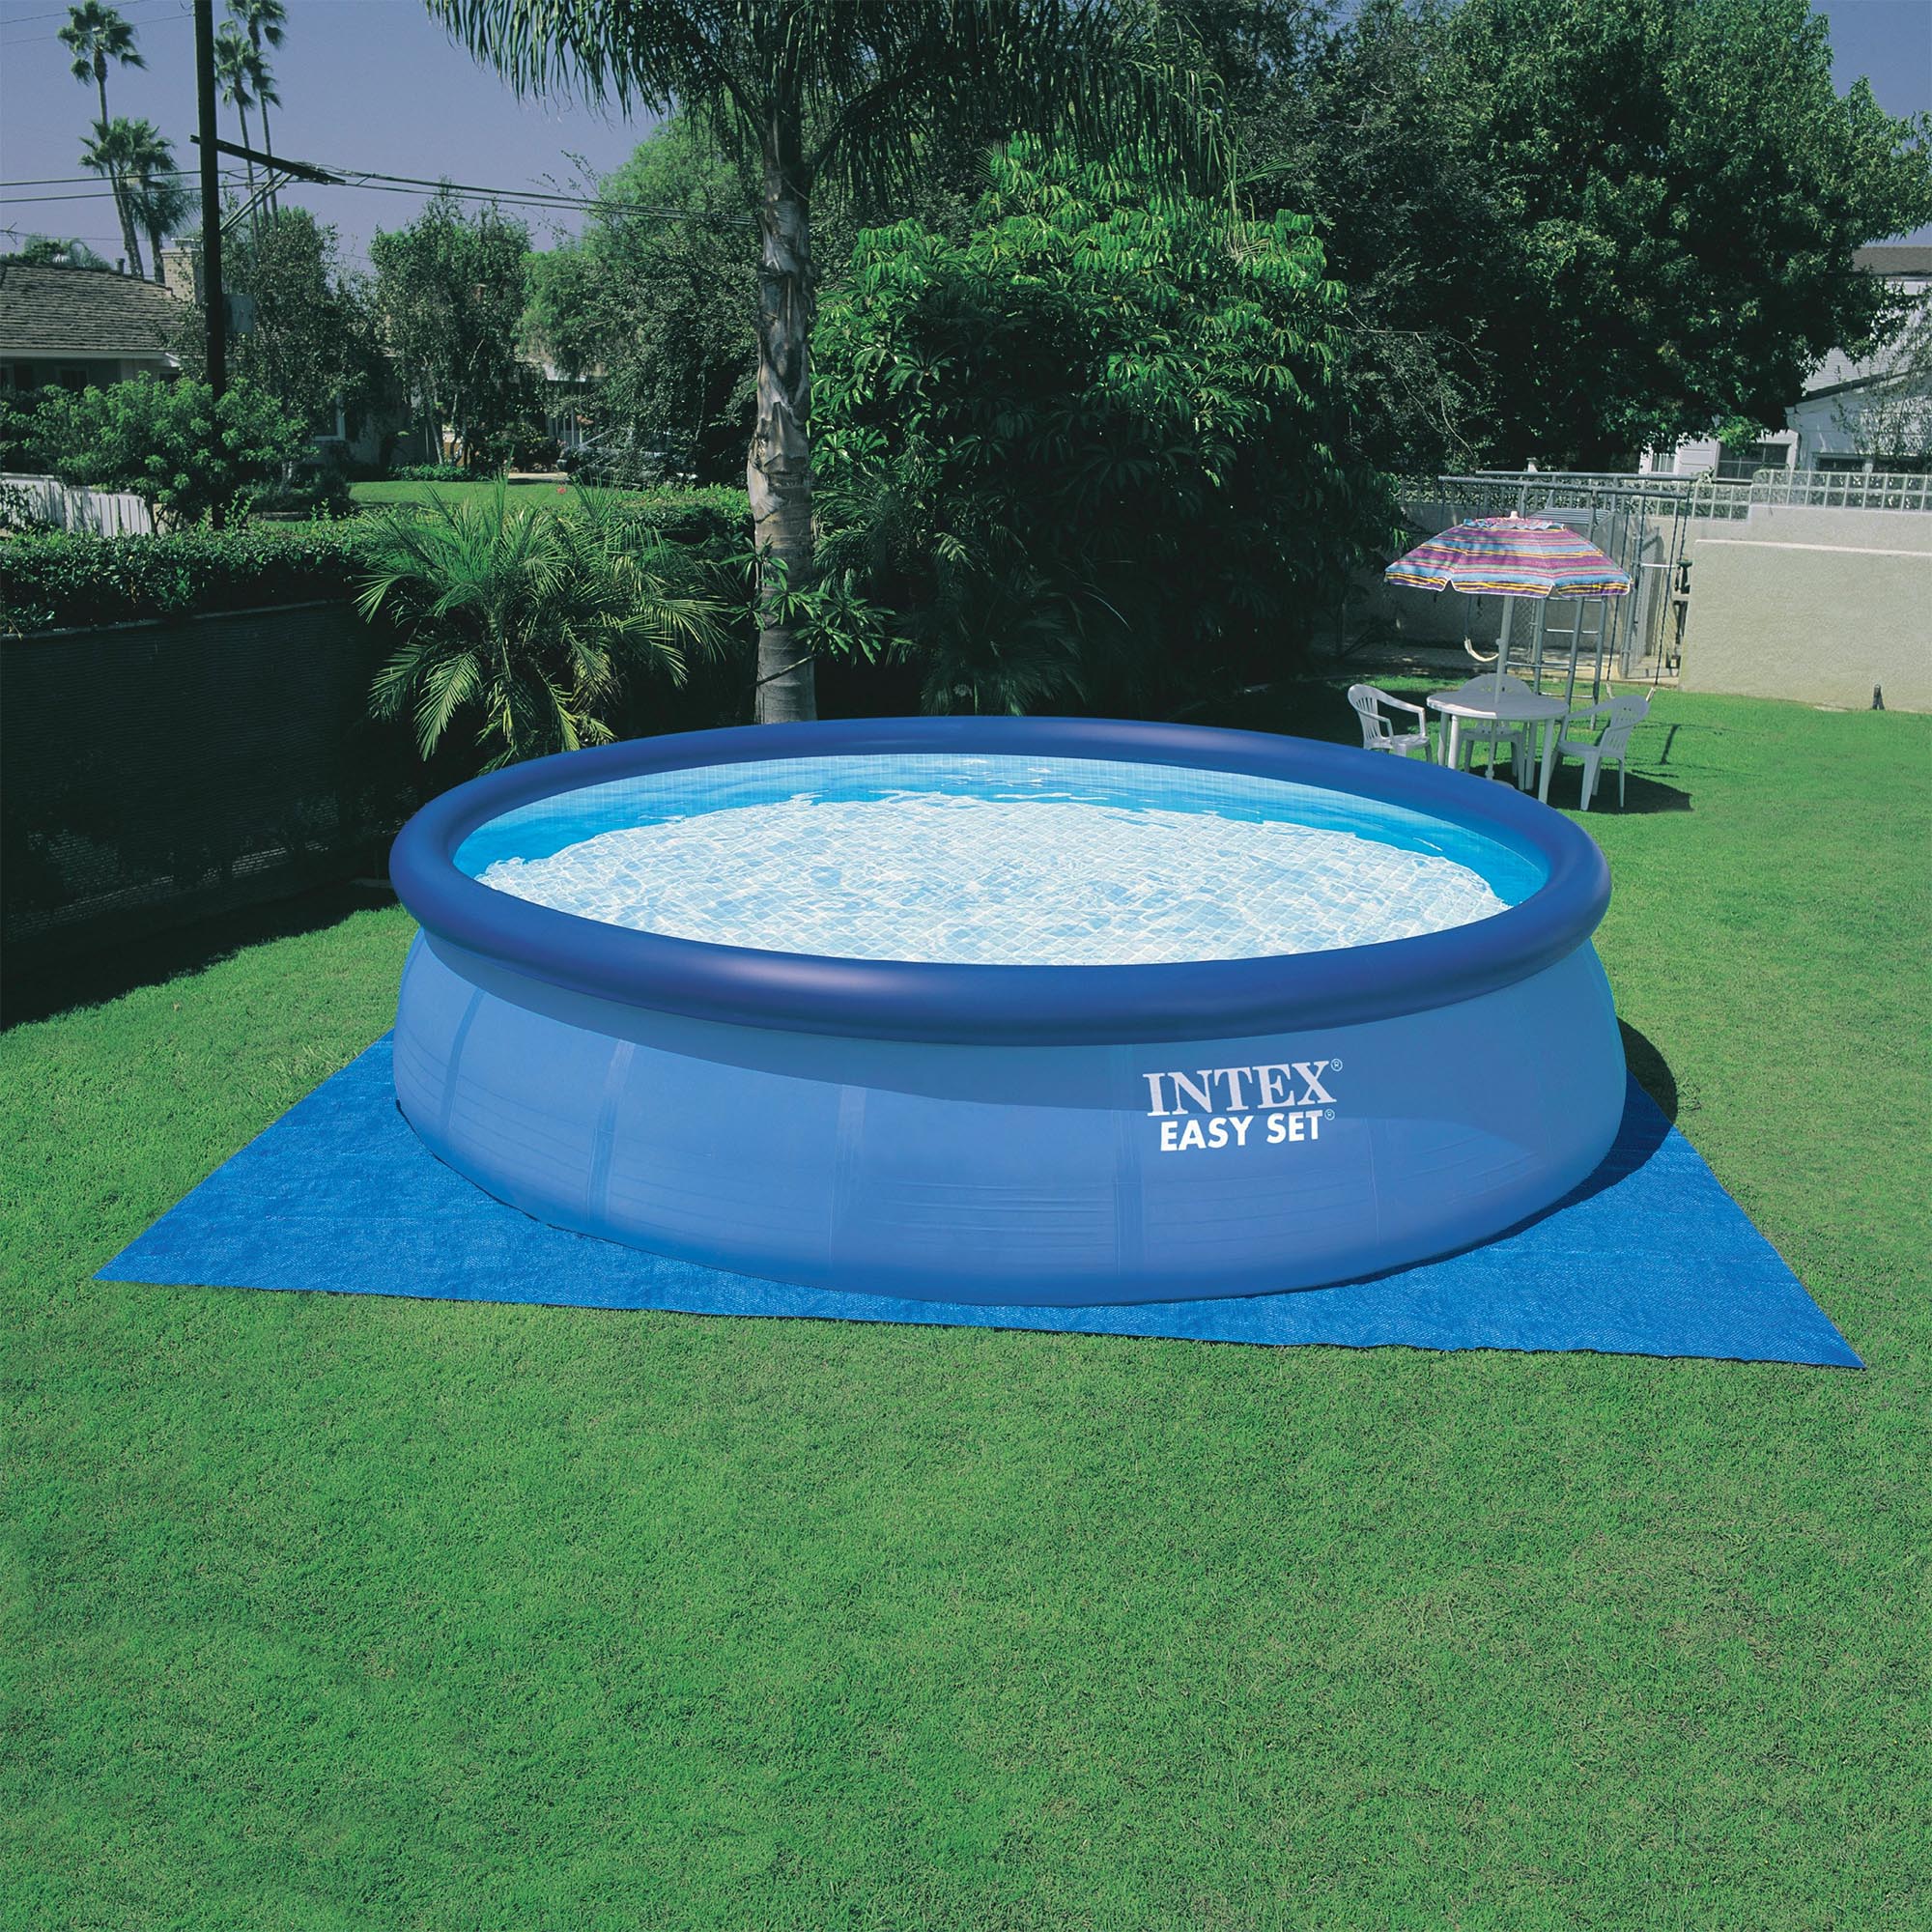 New Intex Easy Set Above Ground Swimming Pool for Simple Design